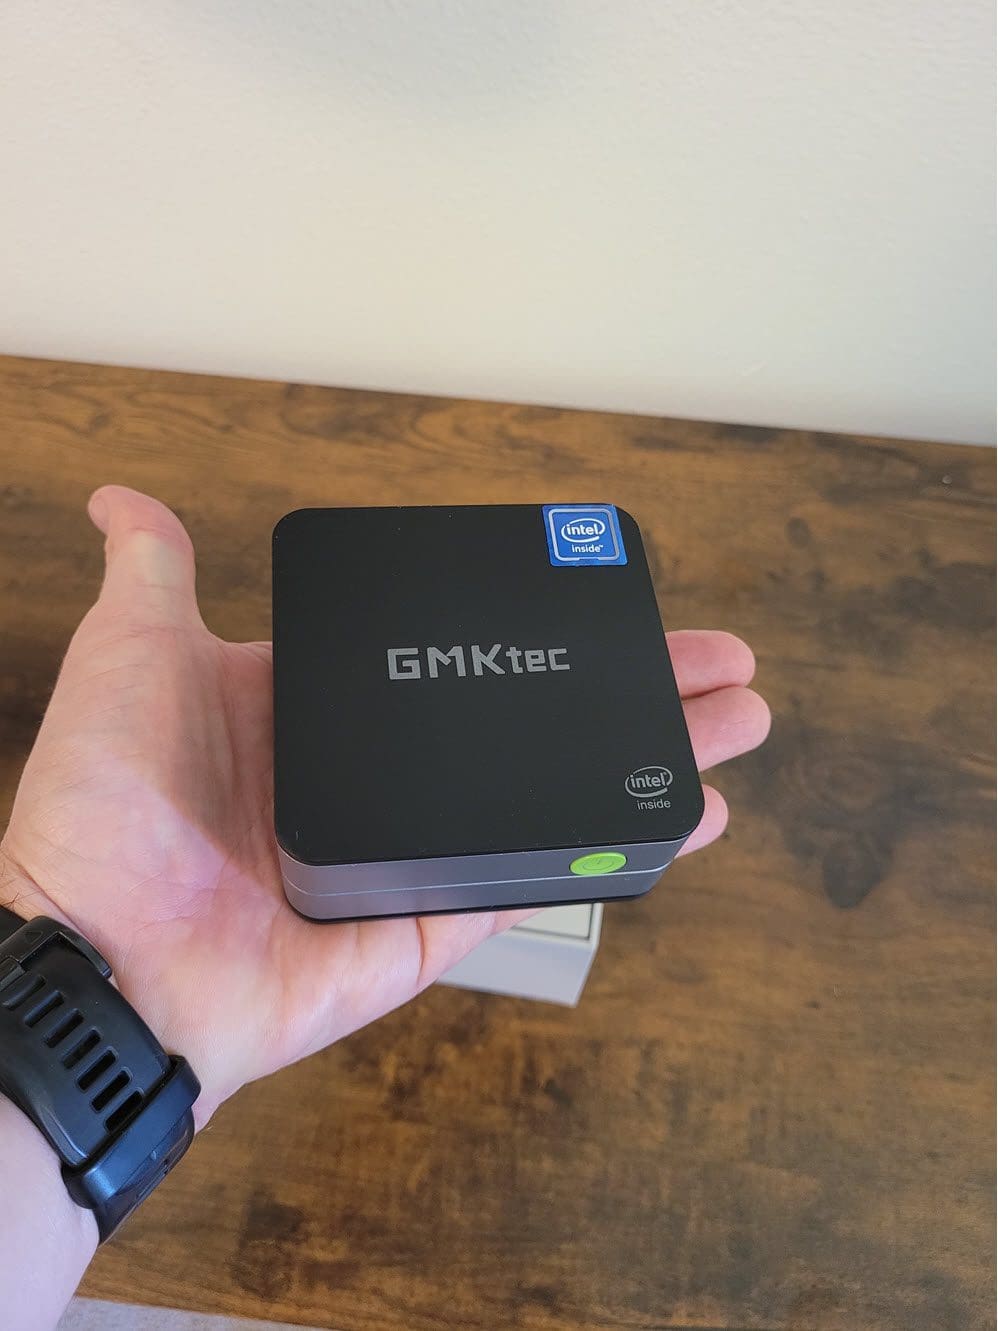 Small size of the GMKtec Nucbox G2